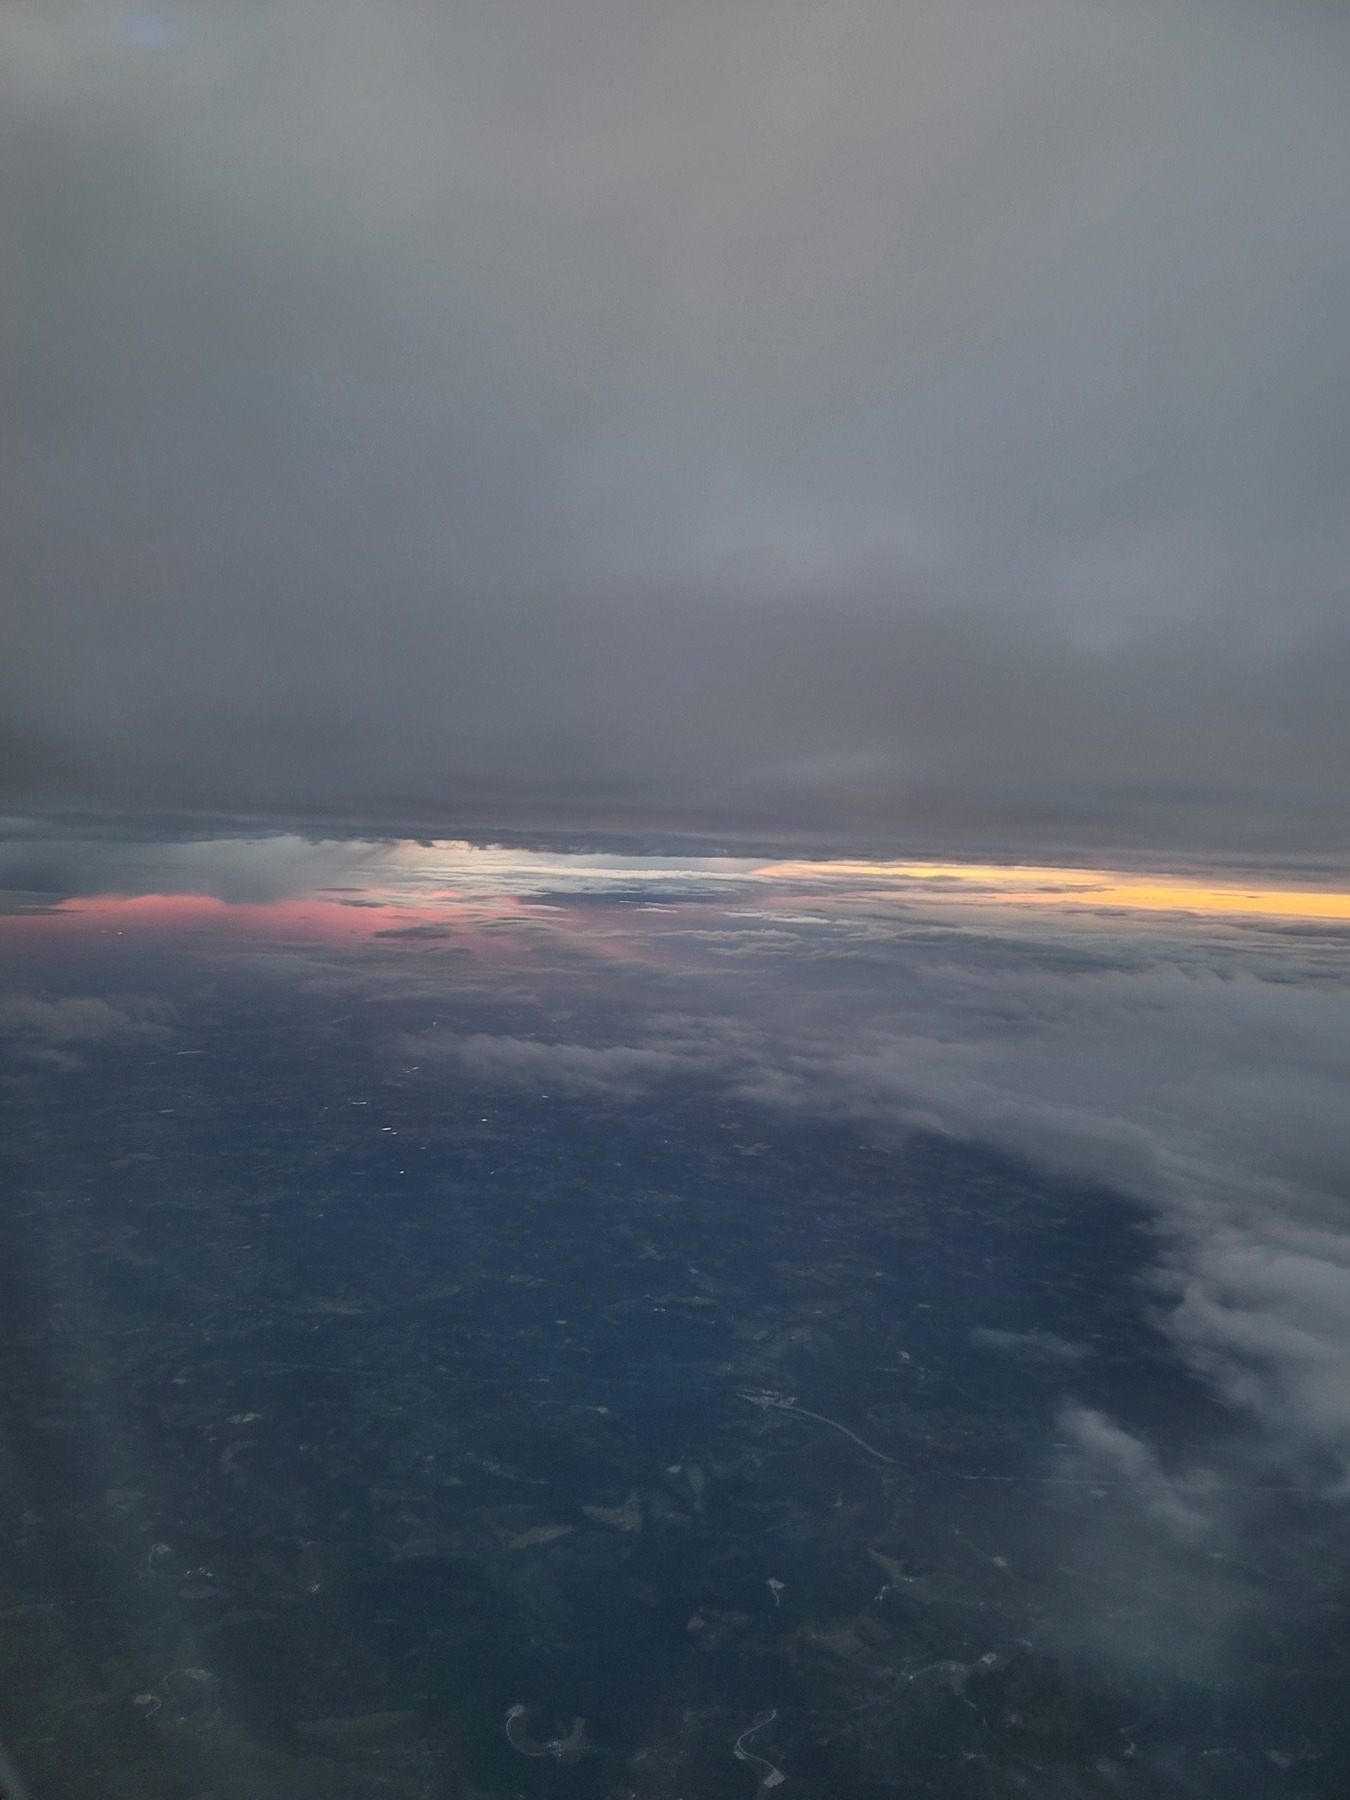 gray clouds but in center of image a break on the sky - a streak of pink on the left and a streak of orange on the right. mass of trees visible in lower left corner